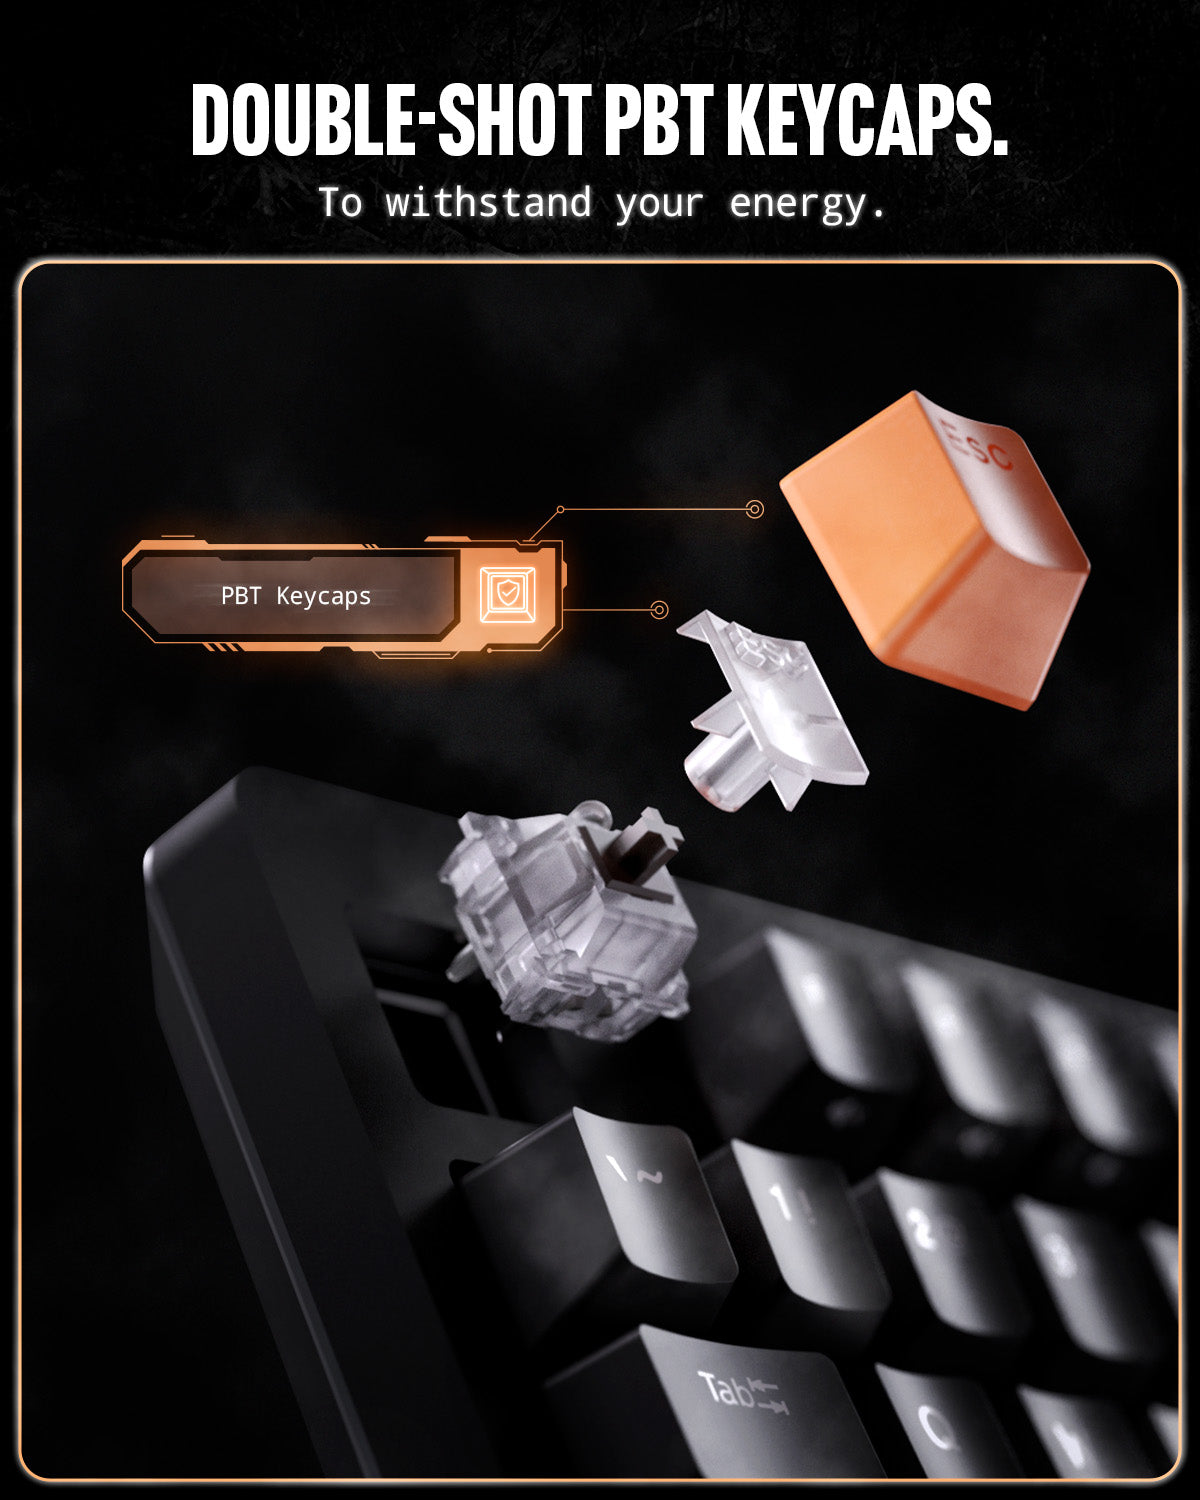 APP06427 - Spigen ArcPLAY Keyboard showing the double-shot pbt keycaps to withstand your energy.